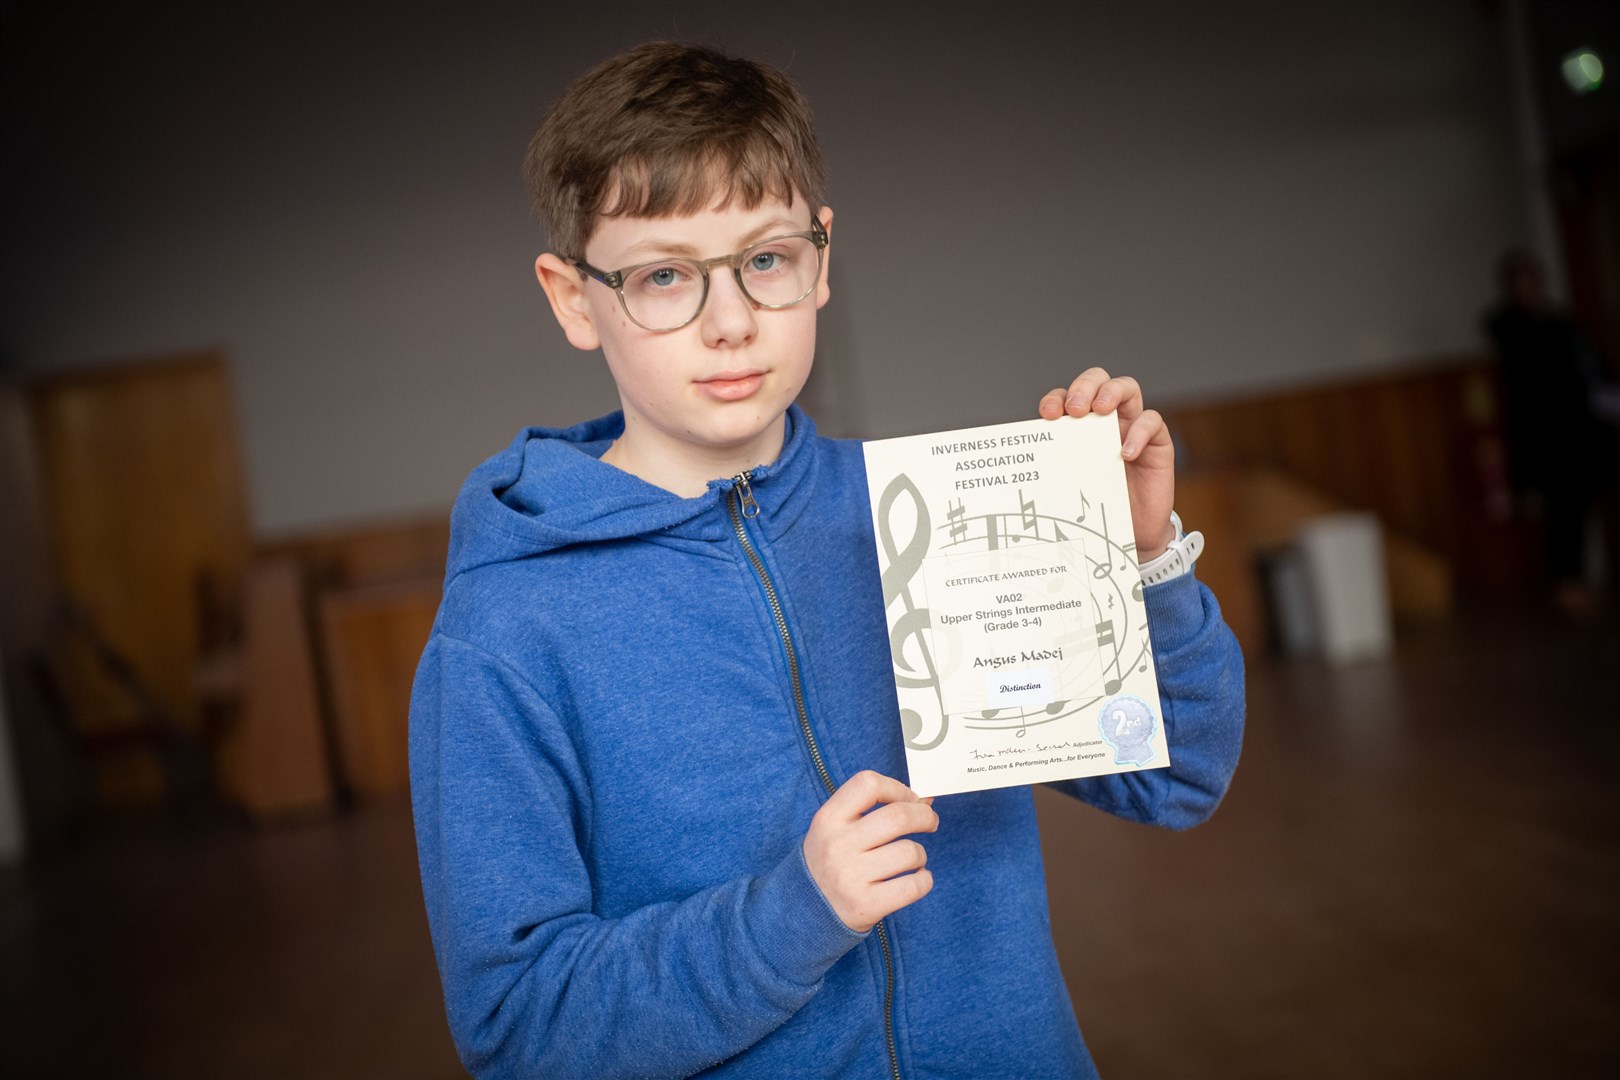 Angus Madej came second in the Upper Strings Intermediate (Grade 3-4). Picture: Callum Mackay